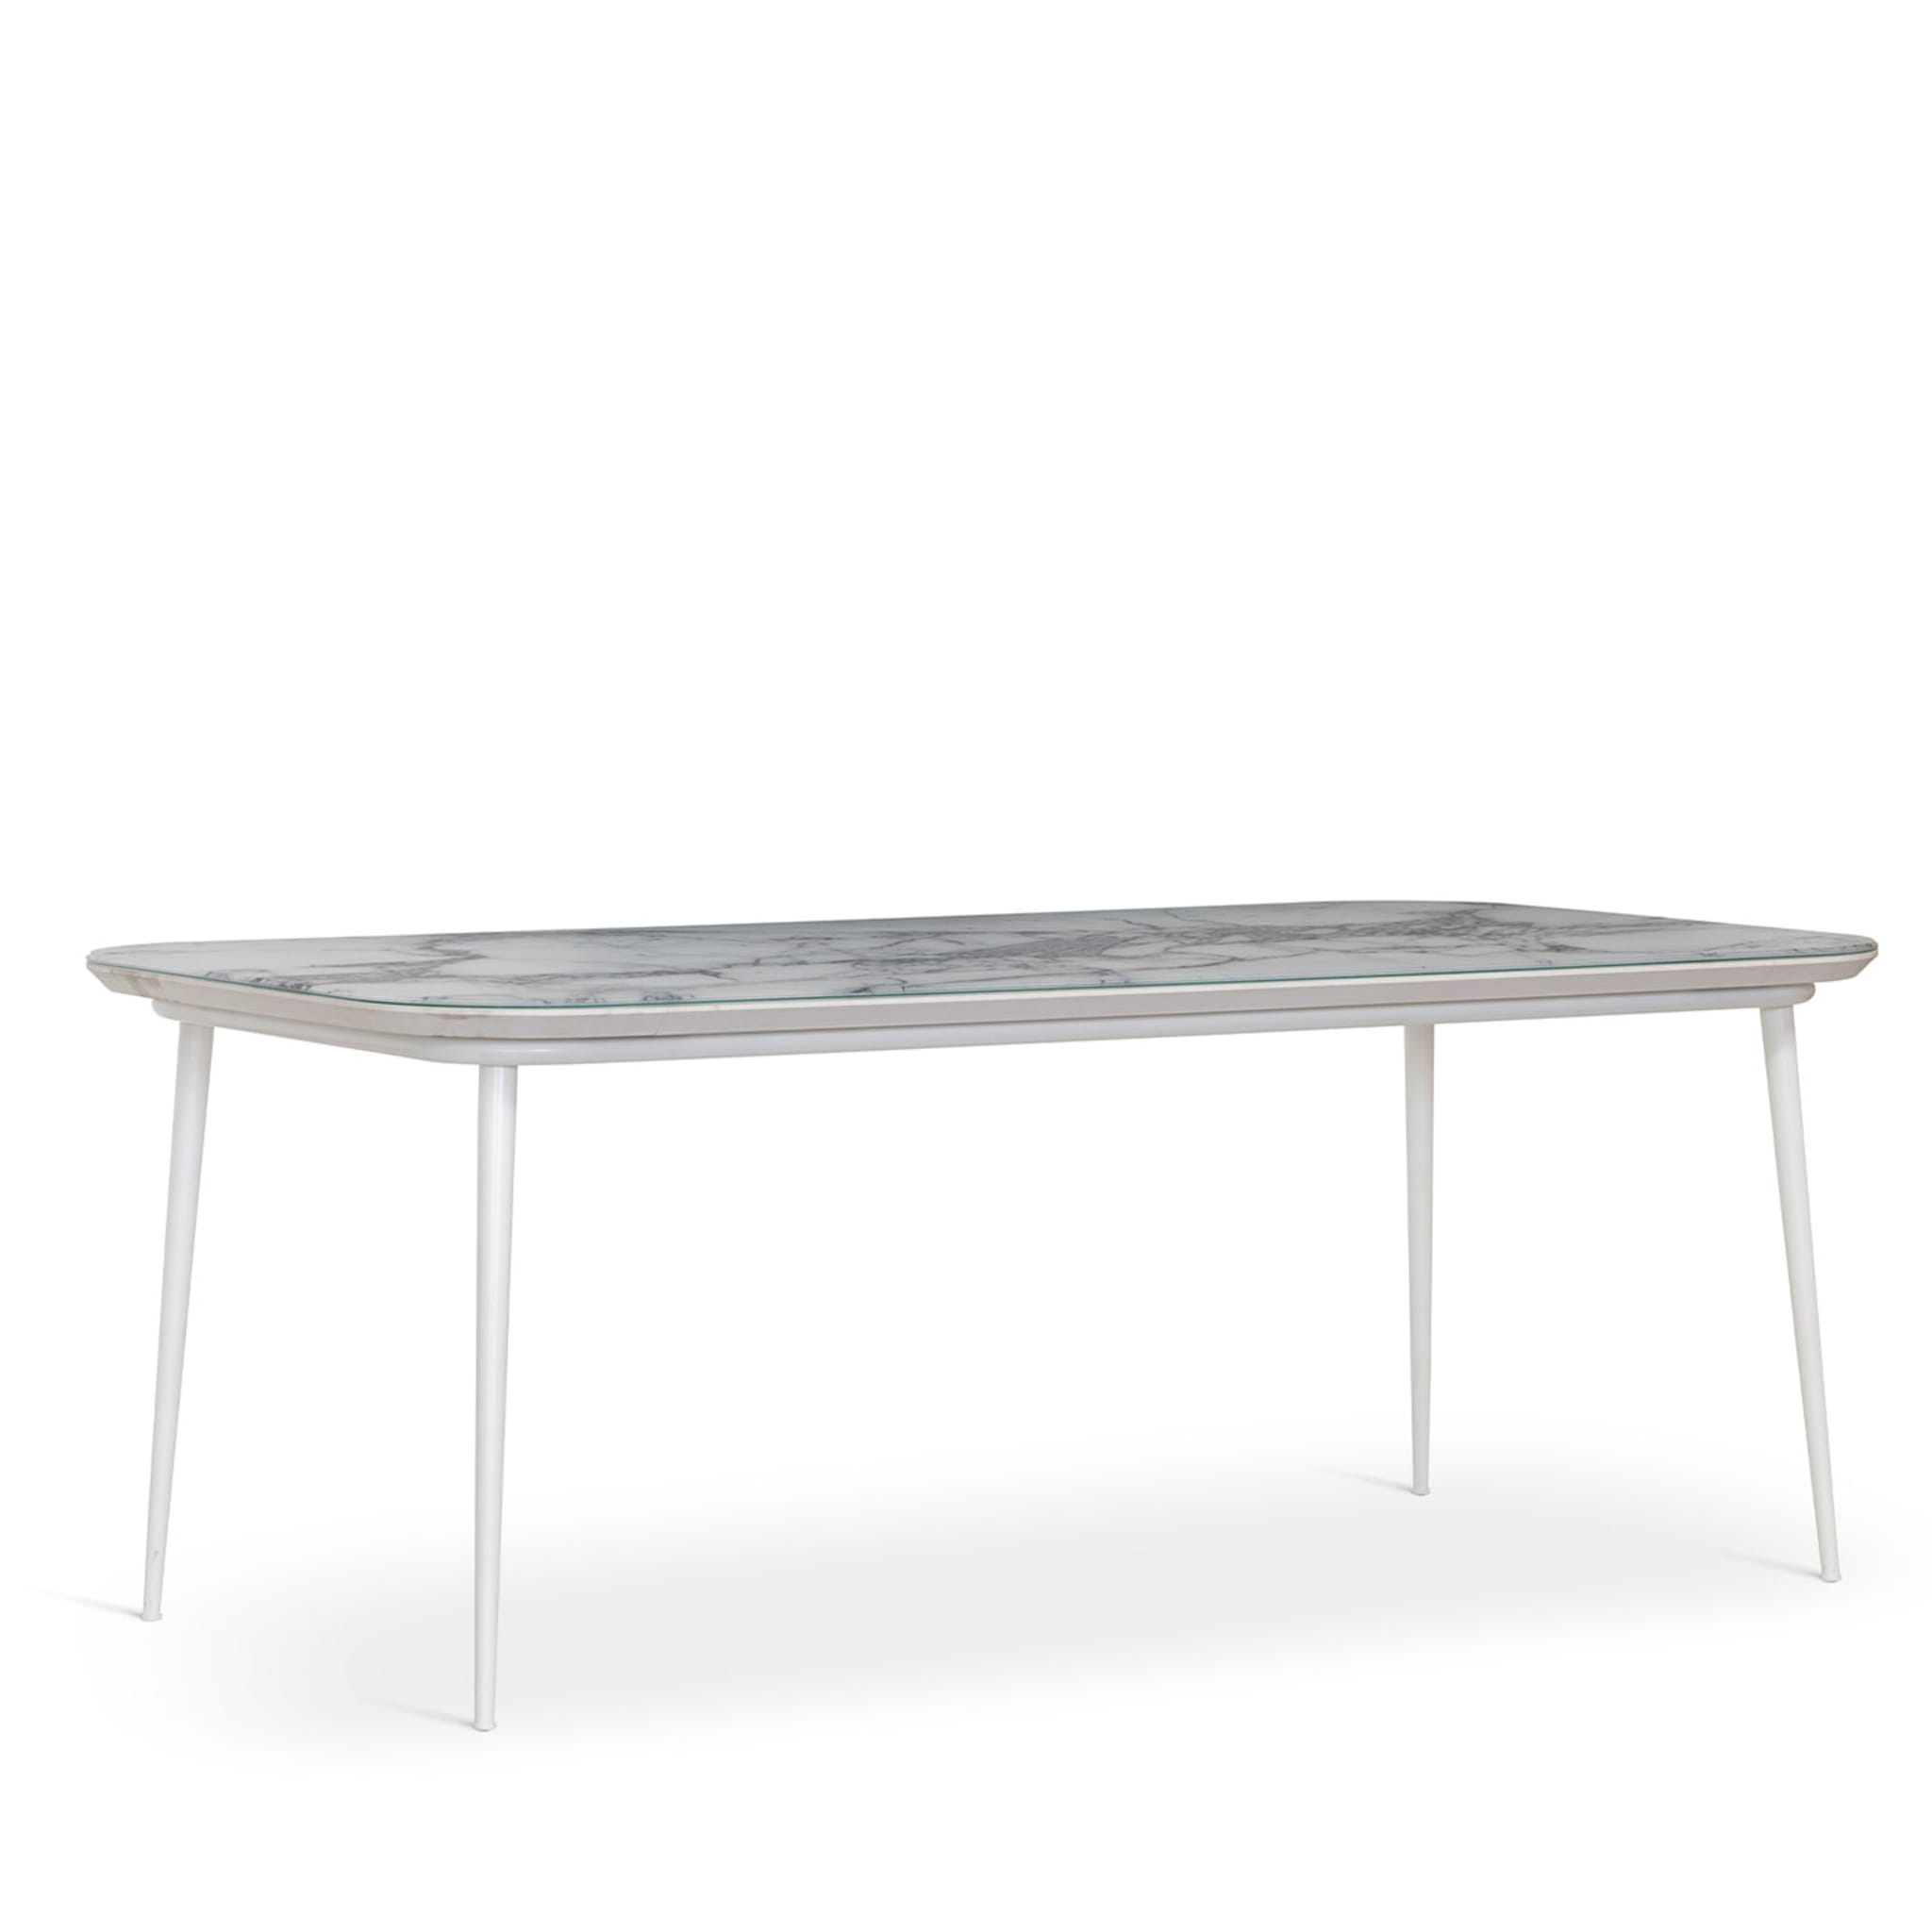 Filicudi Outdoor Dining Table - Alternative view 1